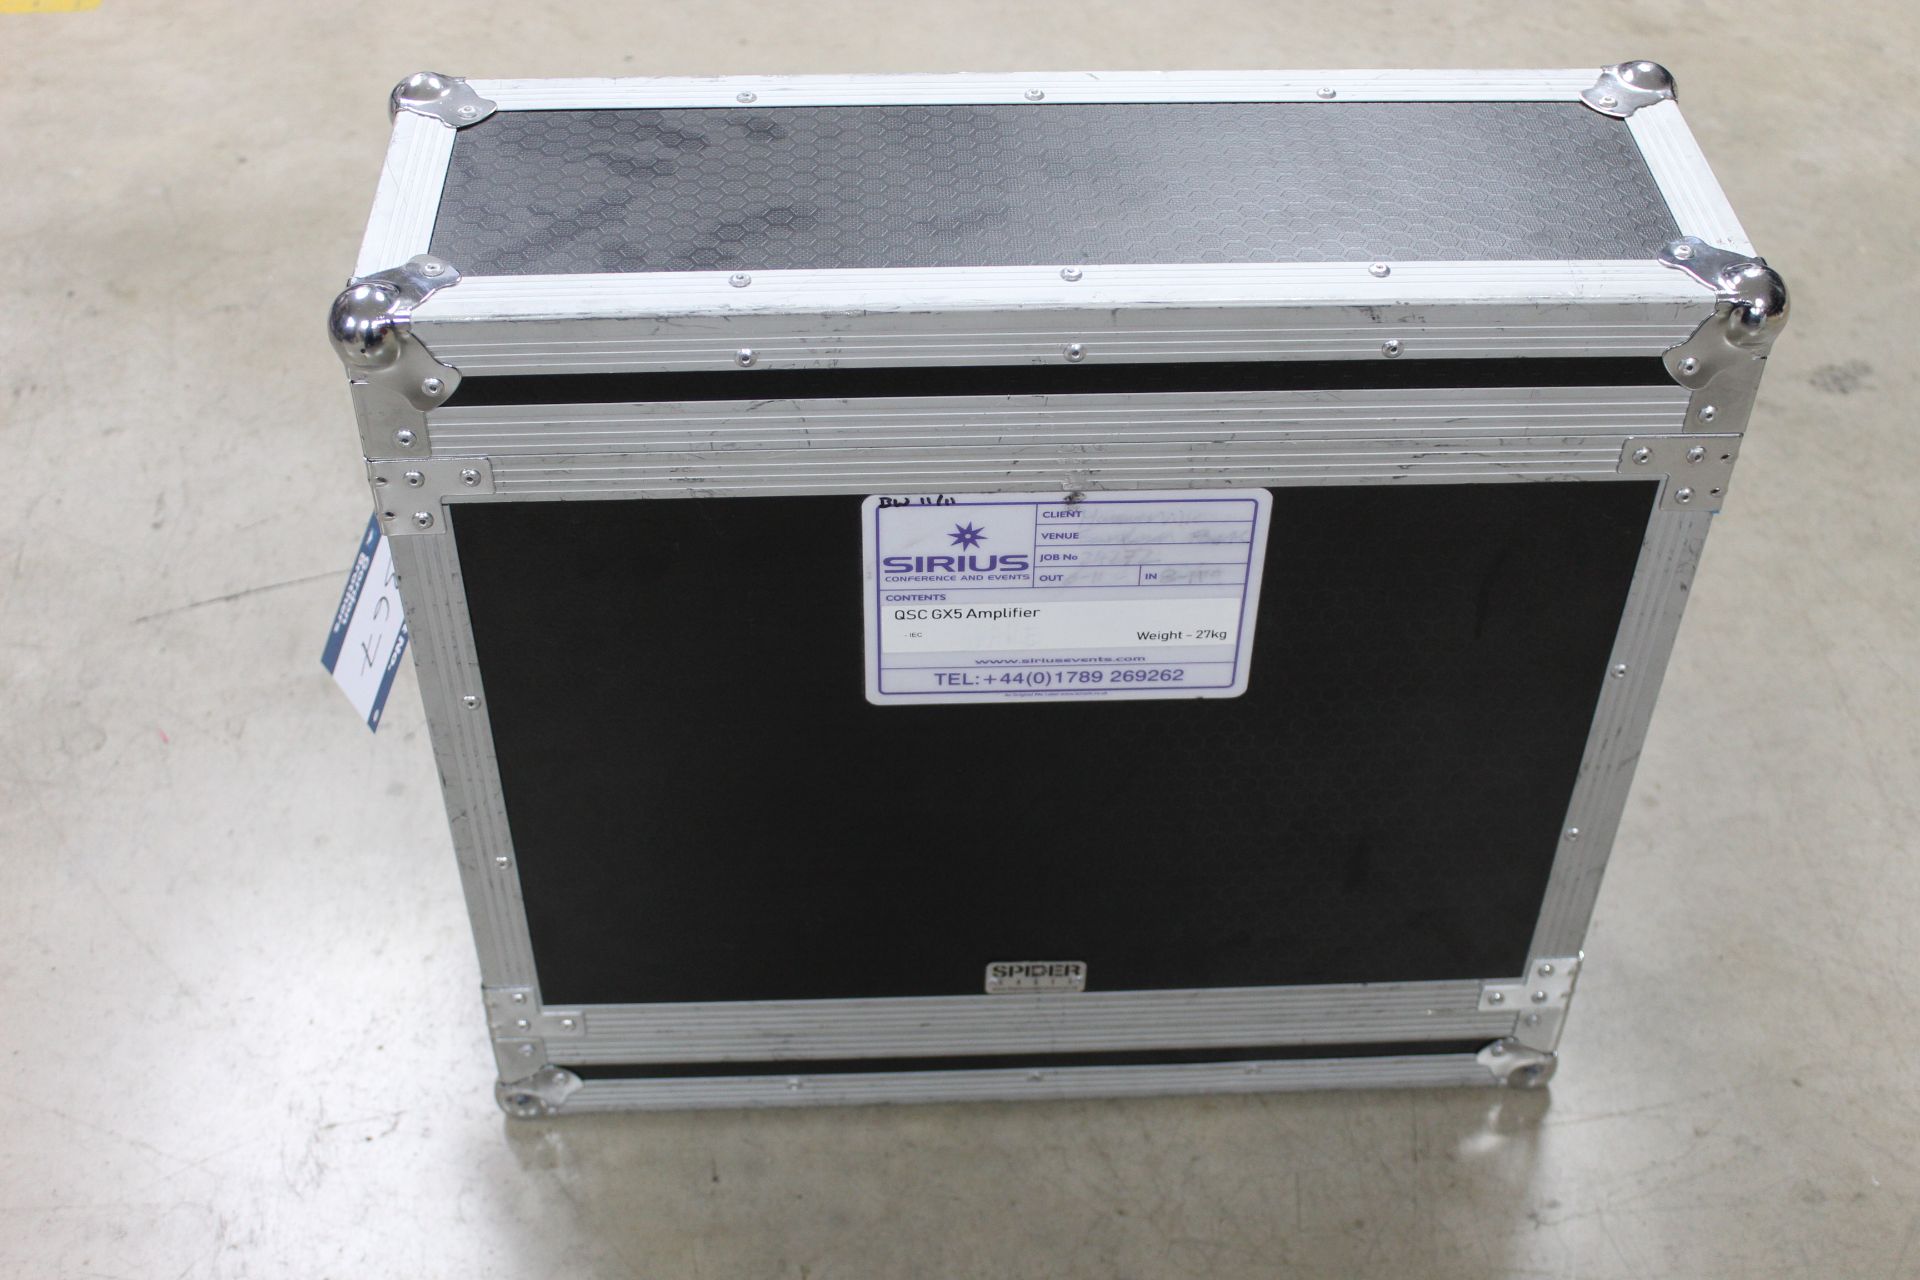 QSC GX5 amplifier, Serial No. 111626478 with 1x IEC in flight case (Purchased in 2018 for £297). - Image 4 of 4